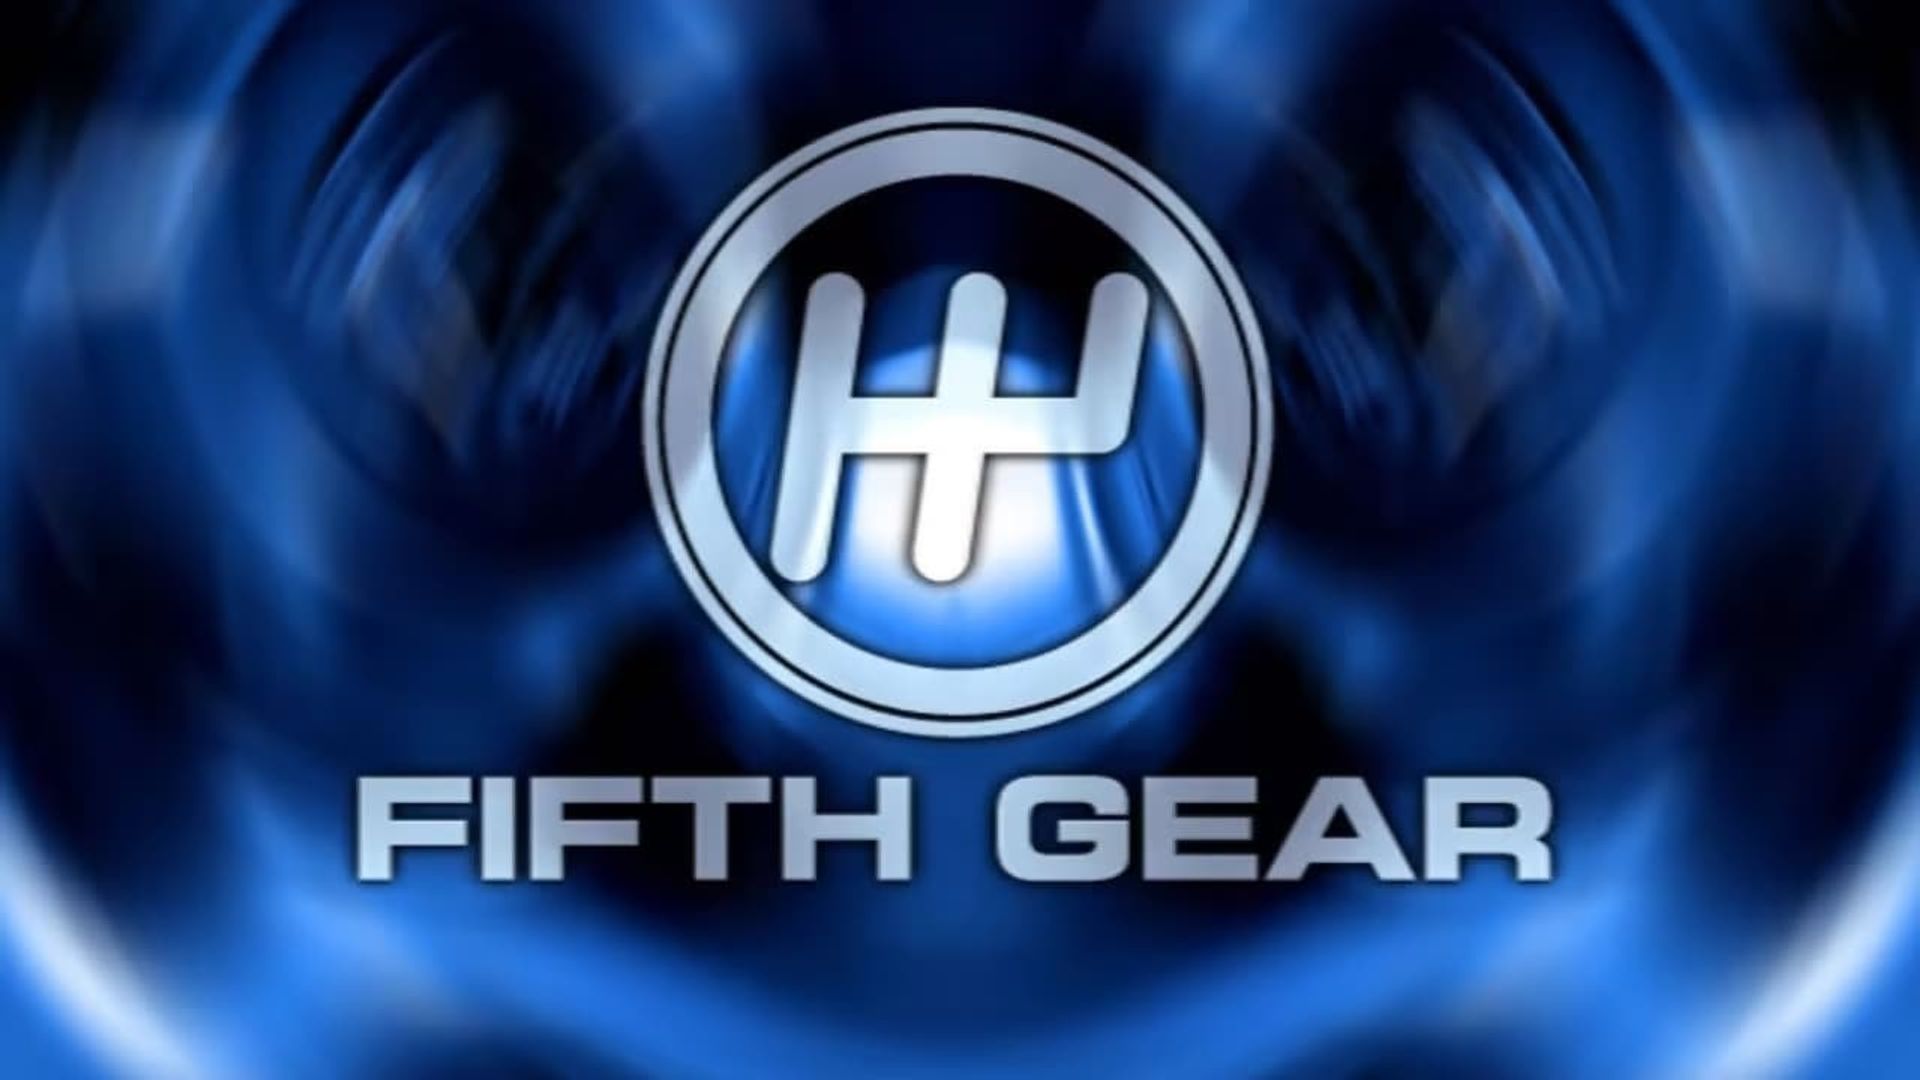 Fifth Gear background